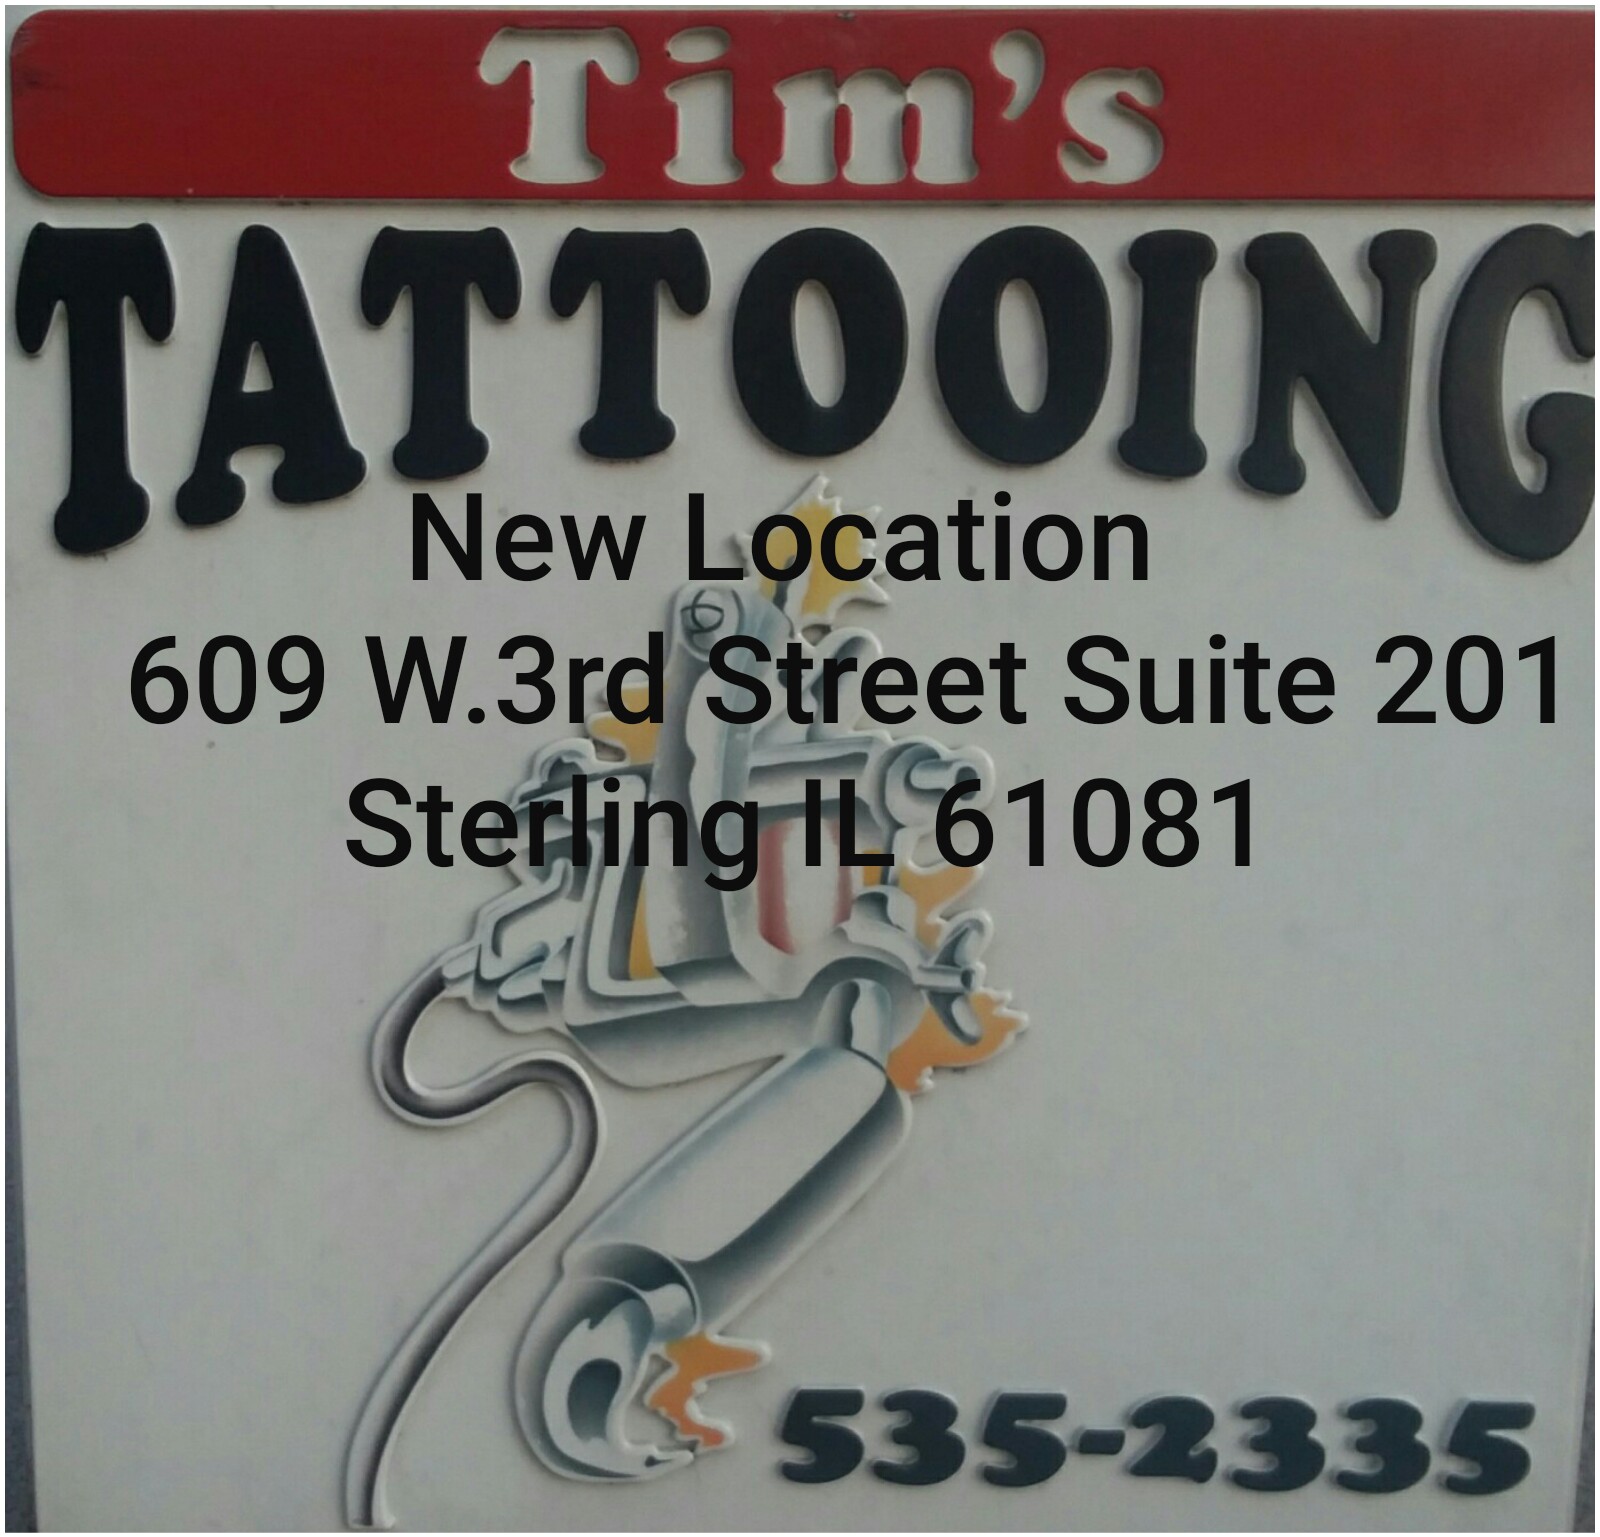 Tims Professional Tattooing